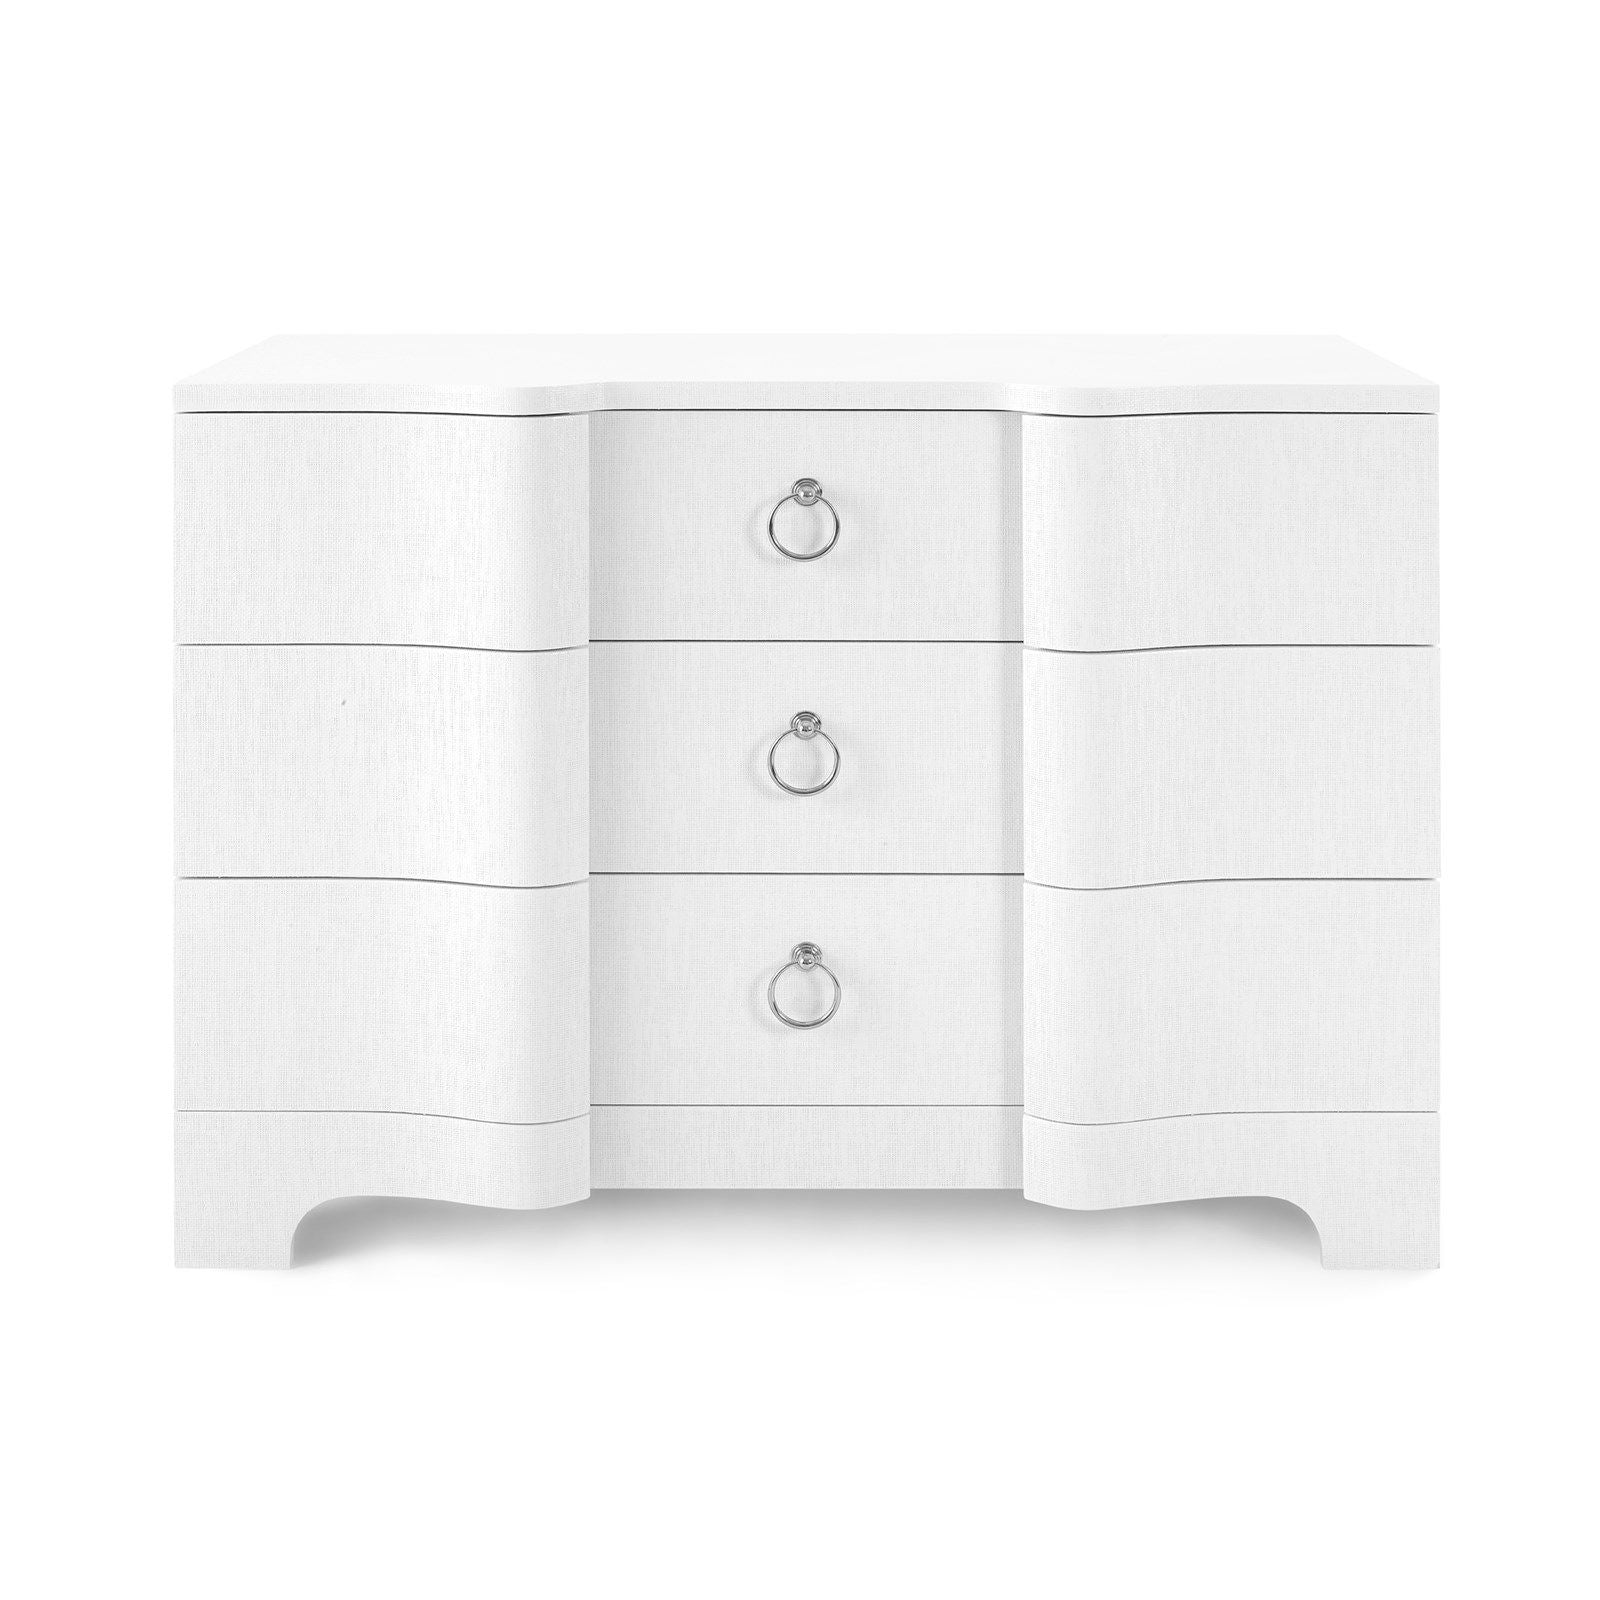 Bungalow 5 Bardot Large 3 Drawer White Lacquered Silver Pull